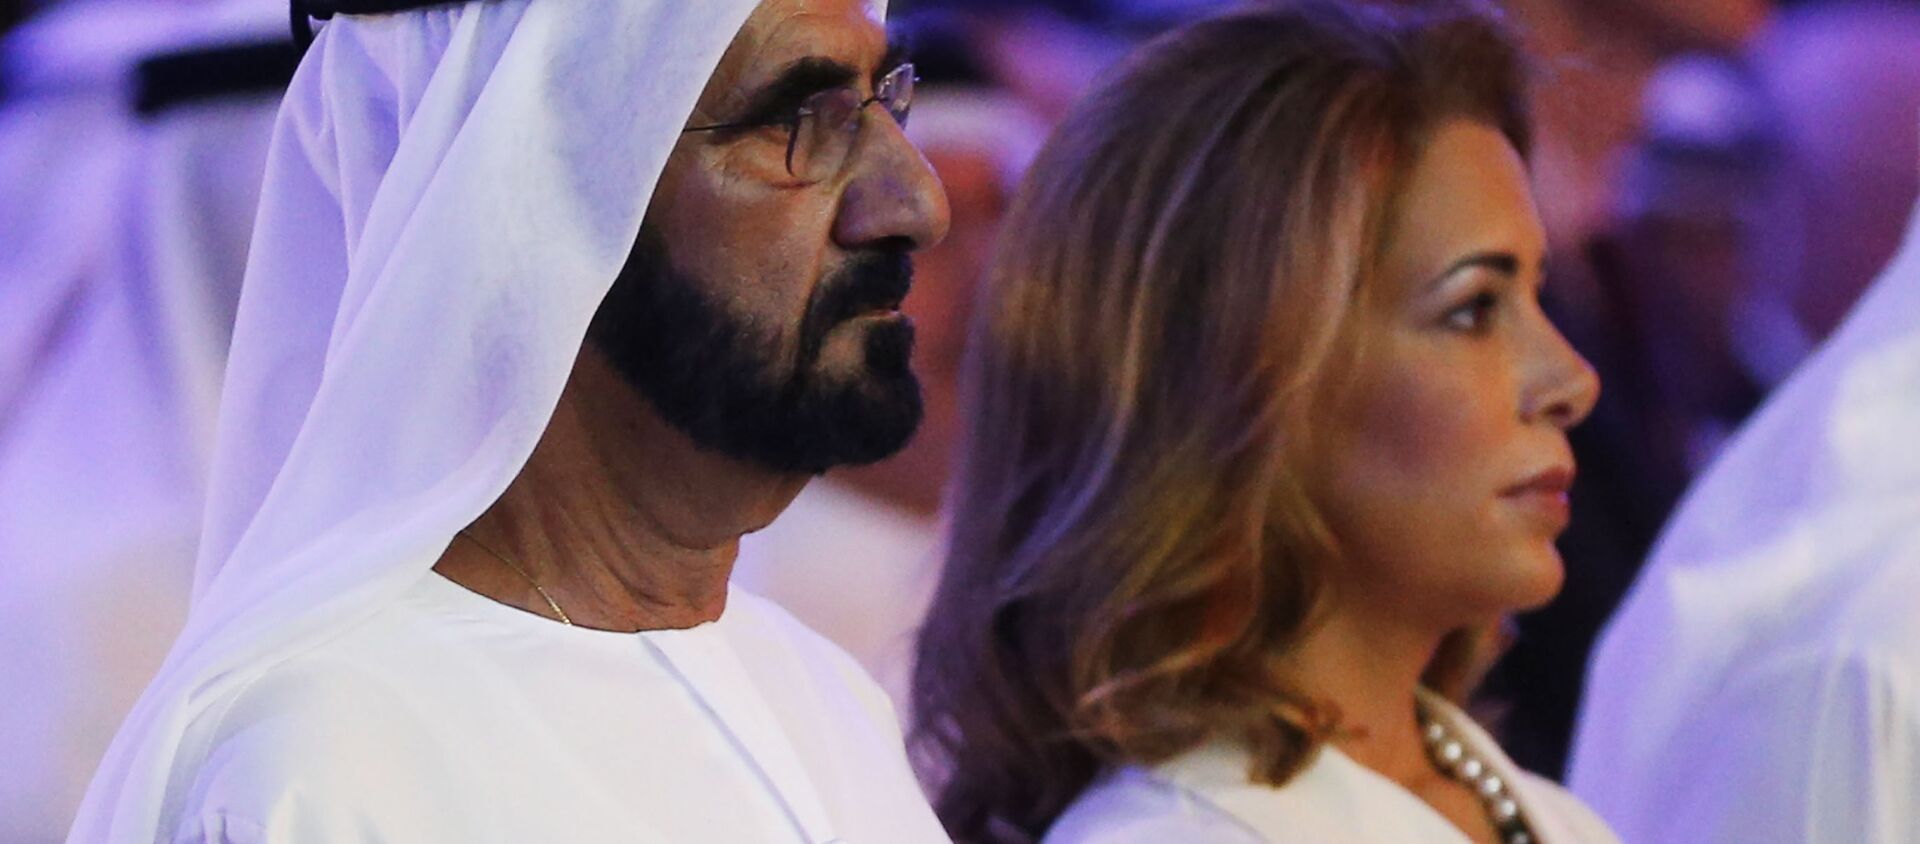 UAE Prime Minister and Dubai Ruler Sheikh Mohammed bin Rashid al-Maktoum (L) stands next to his wife Princess Haya bint al-Hussein during the presentation of a UN report on funding for humanitarian aid on January 17, 2016, in the Emirate of Dubai.  - Sputnik International, 1920, 29.06.2019